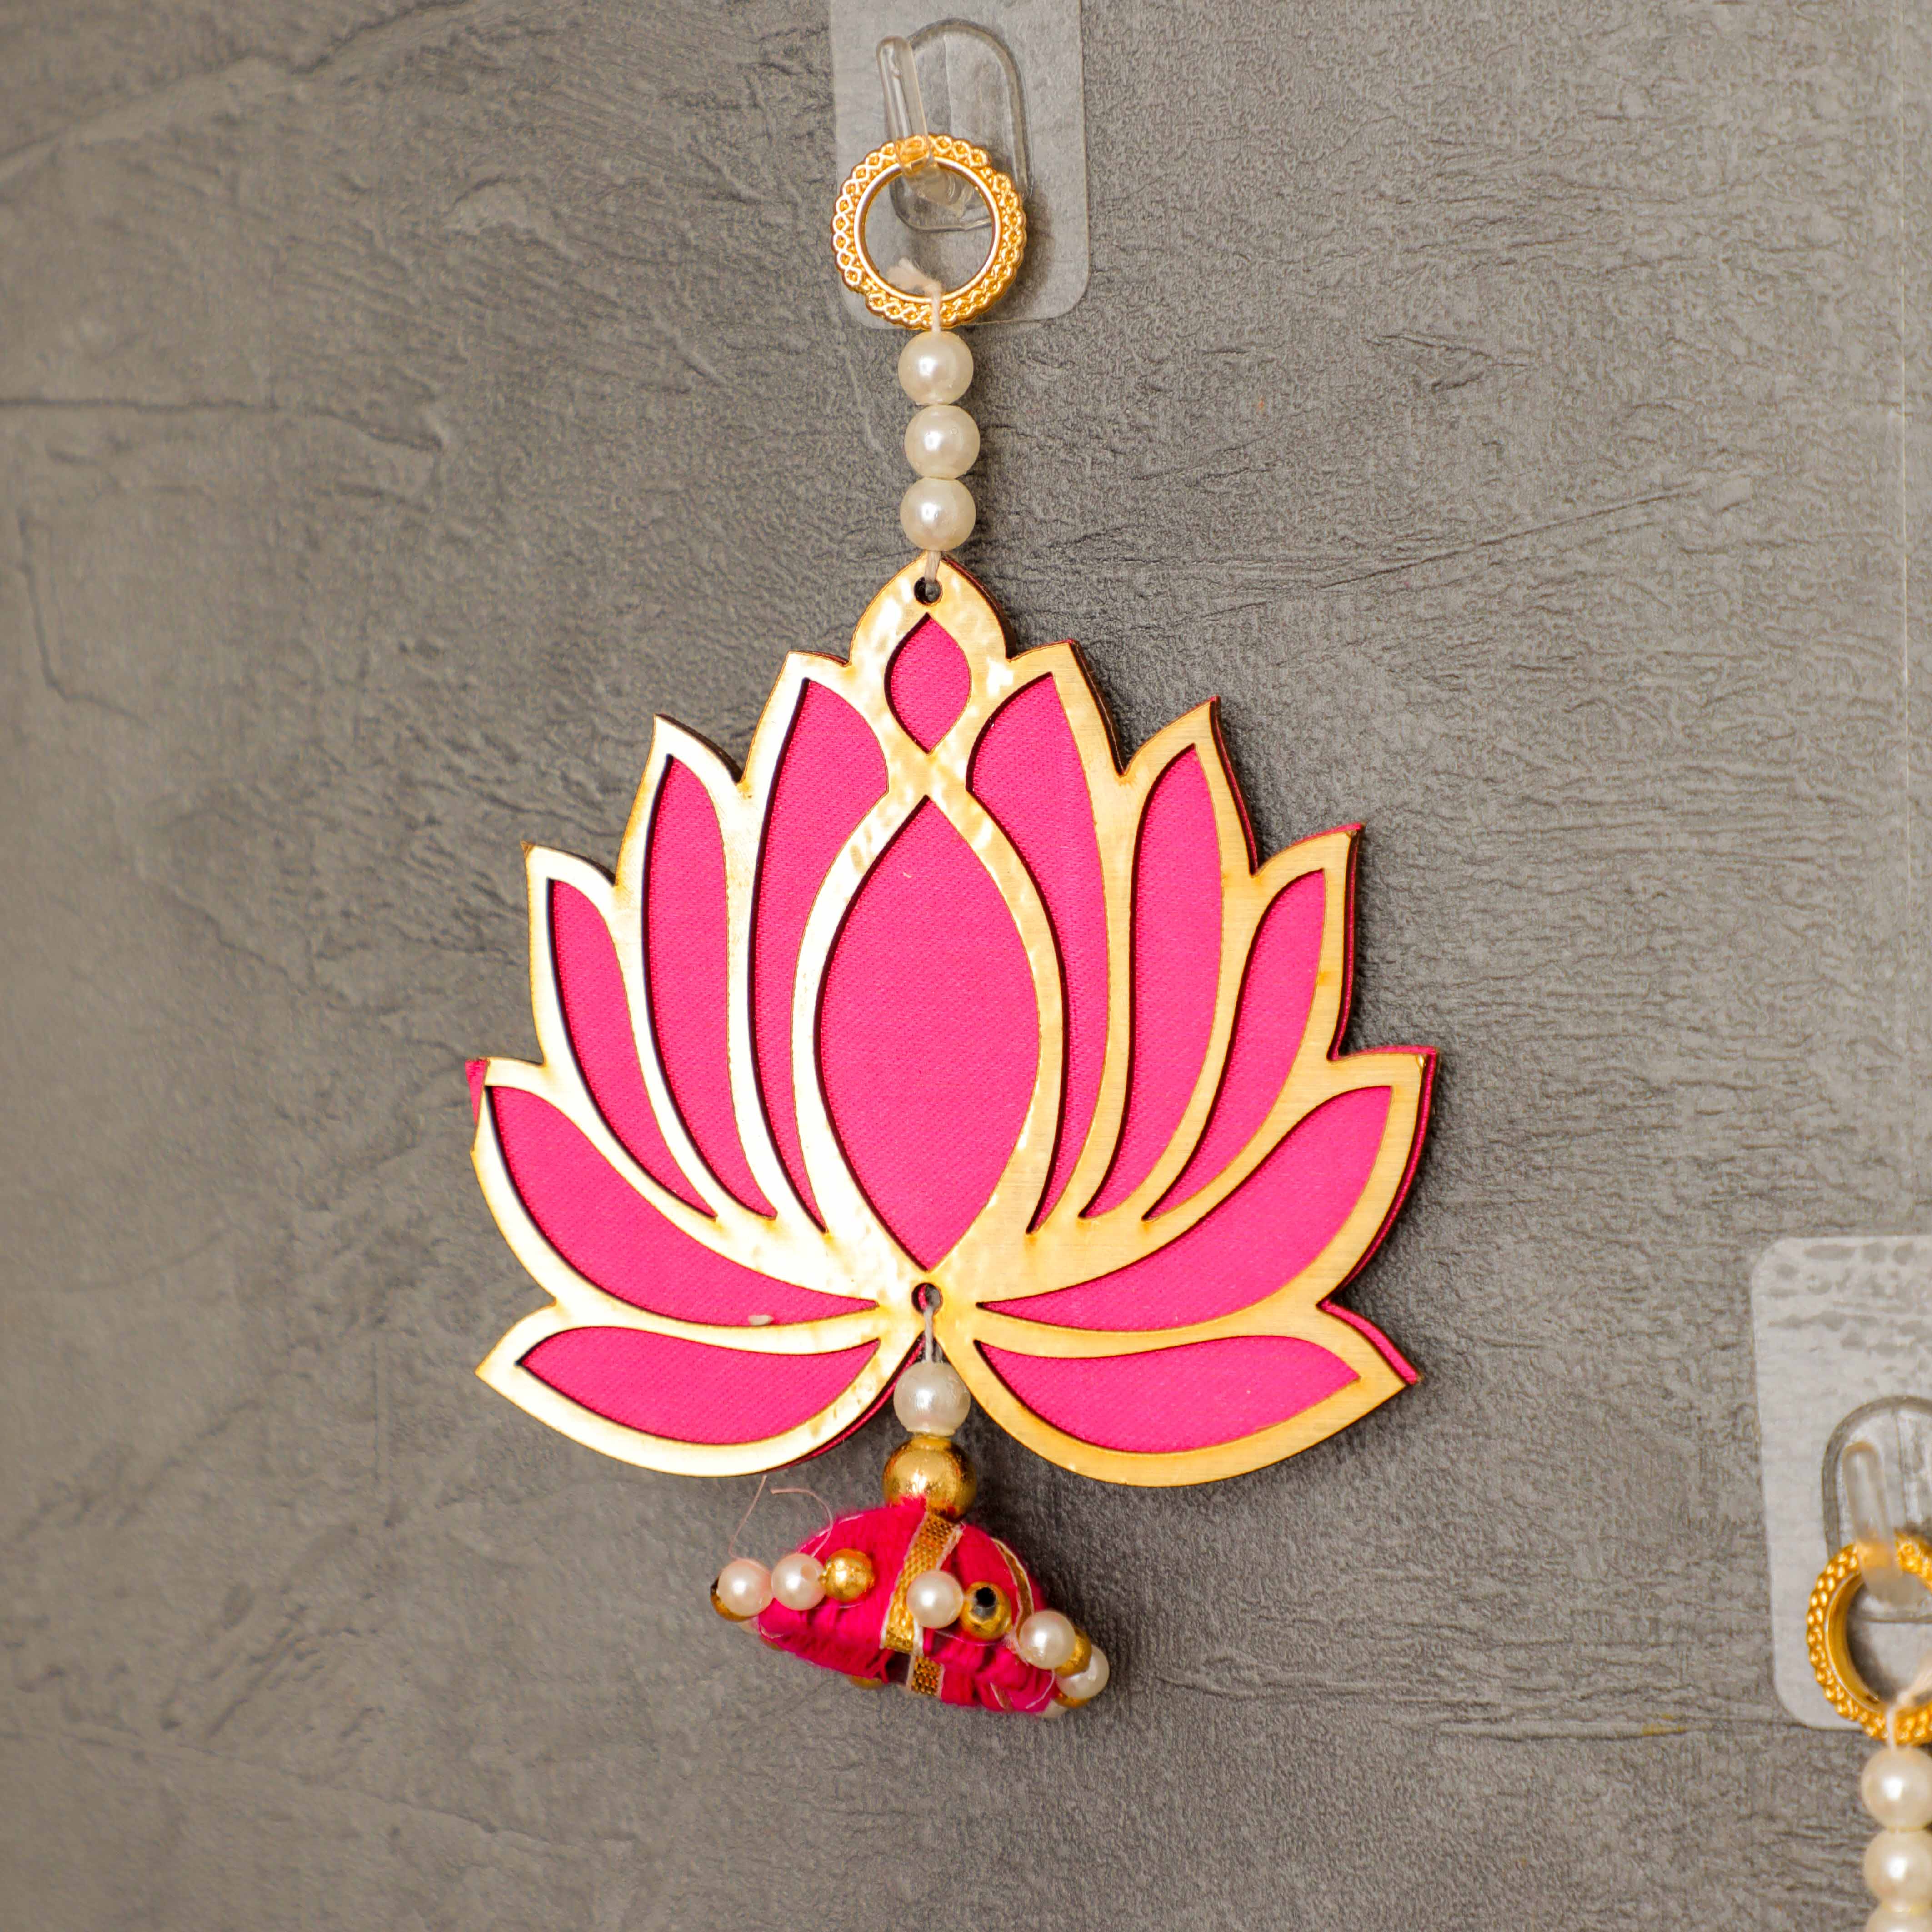 pink lotus has been outlined with a golden rim and embellished with white pearls